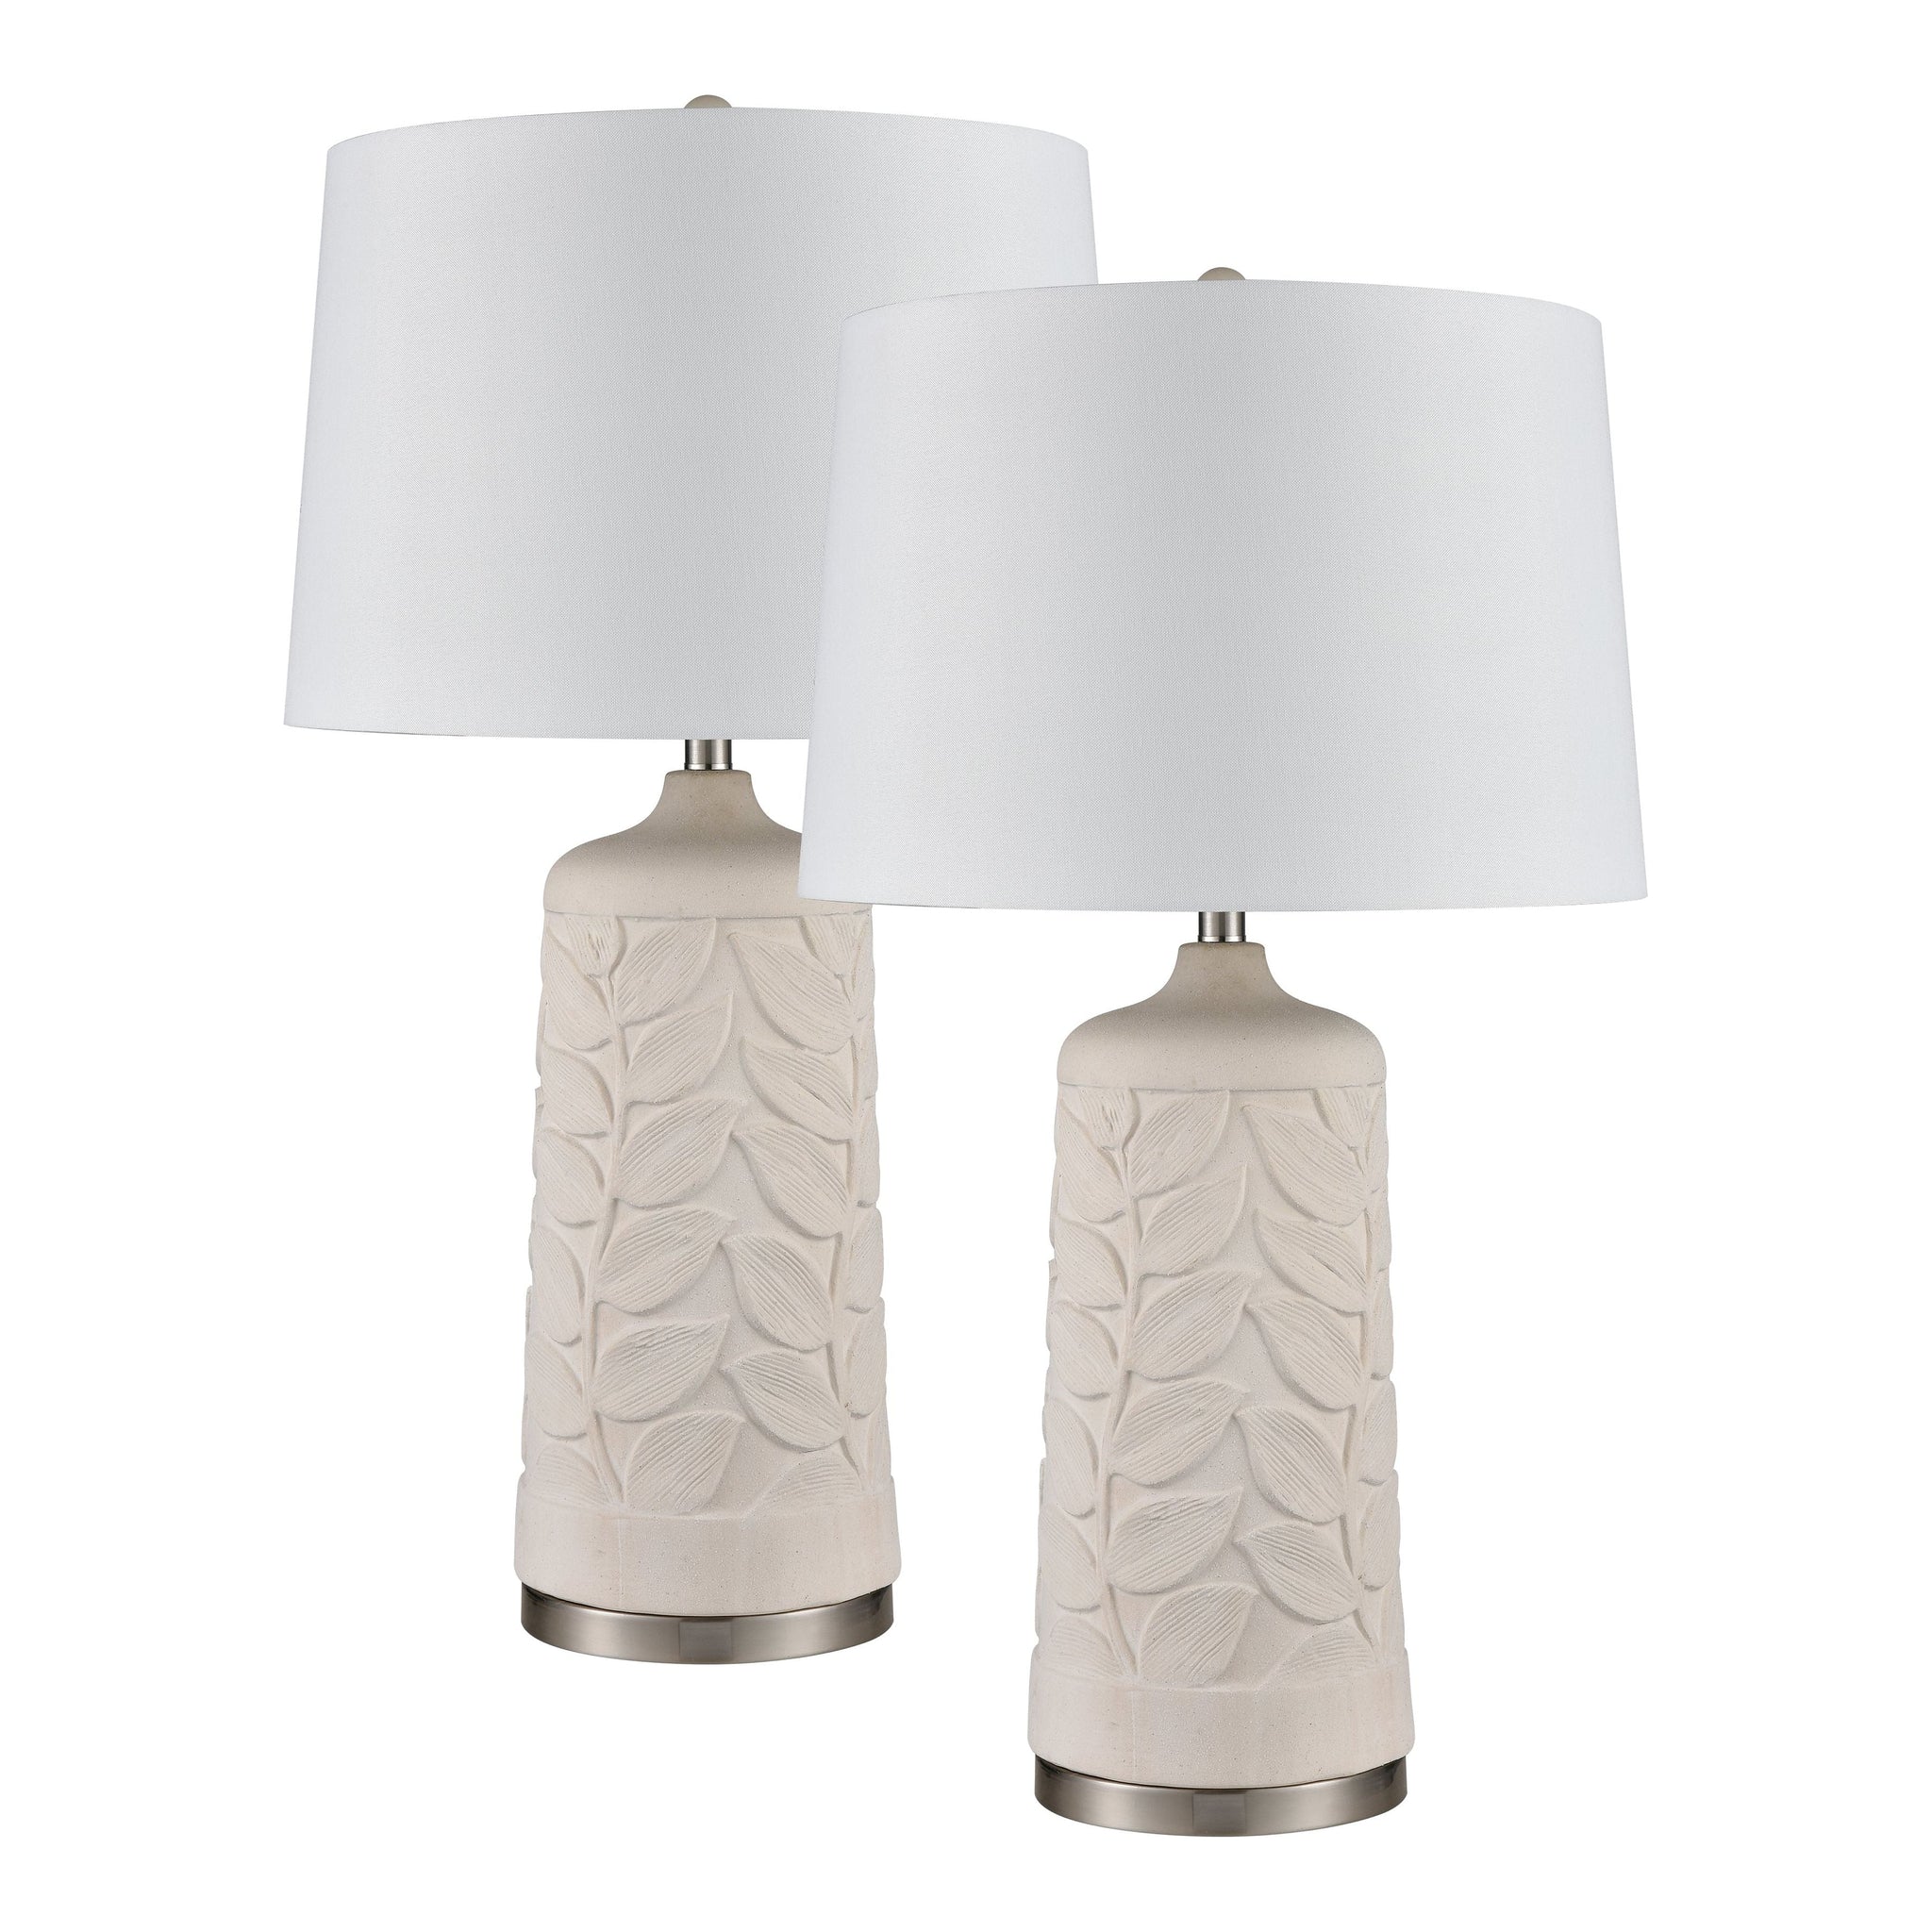 Penny 32.5" High 1-Light Table Lamp (Set of 2)